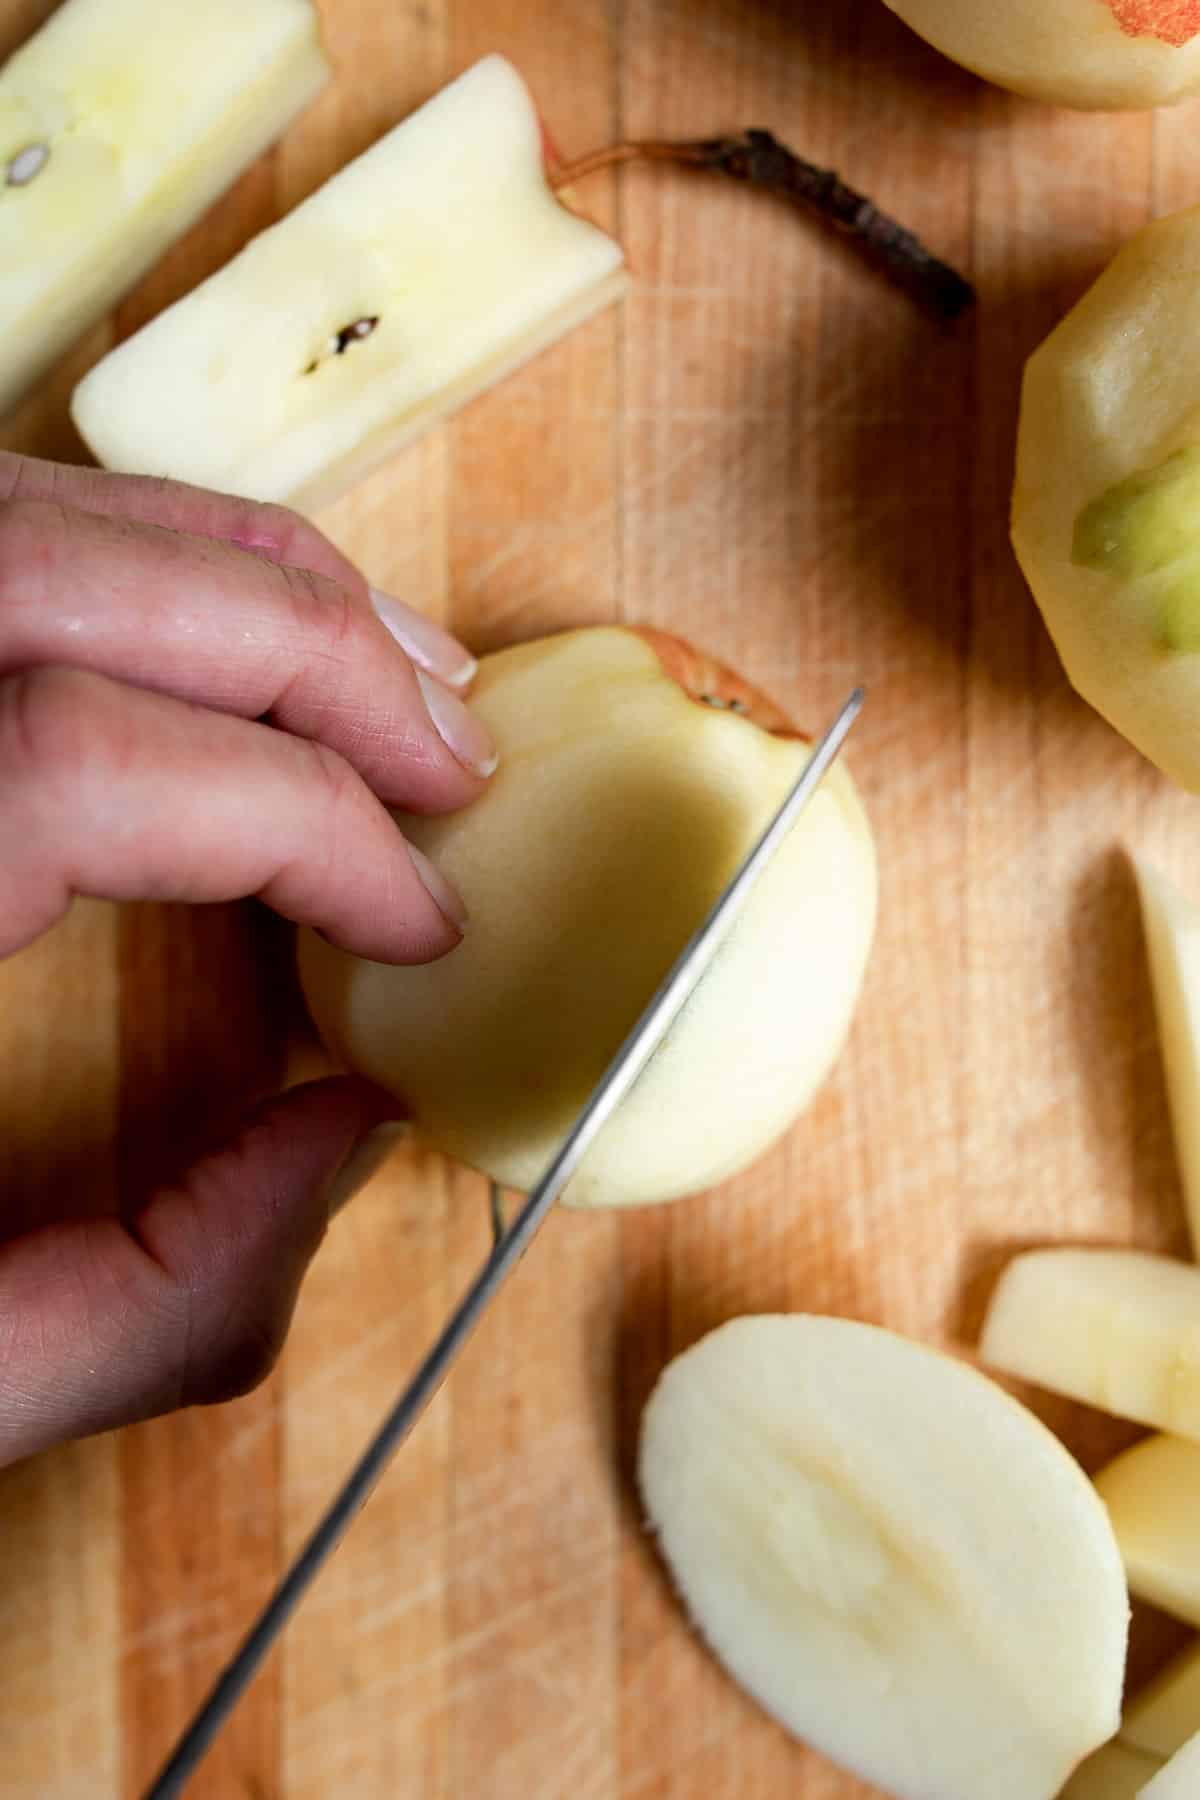 knife coring and cutting apples on wooden cutting board.